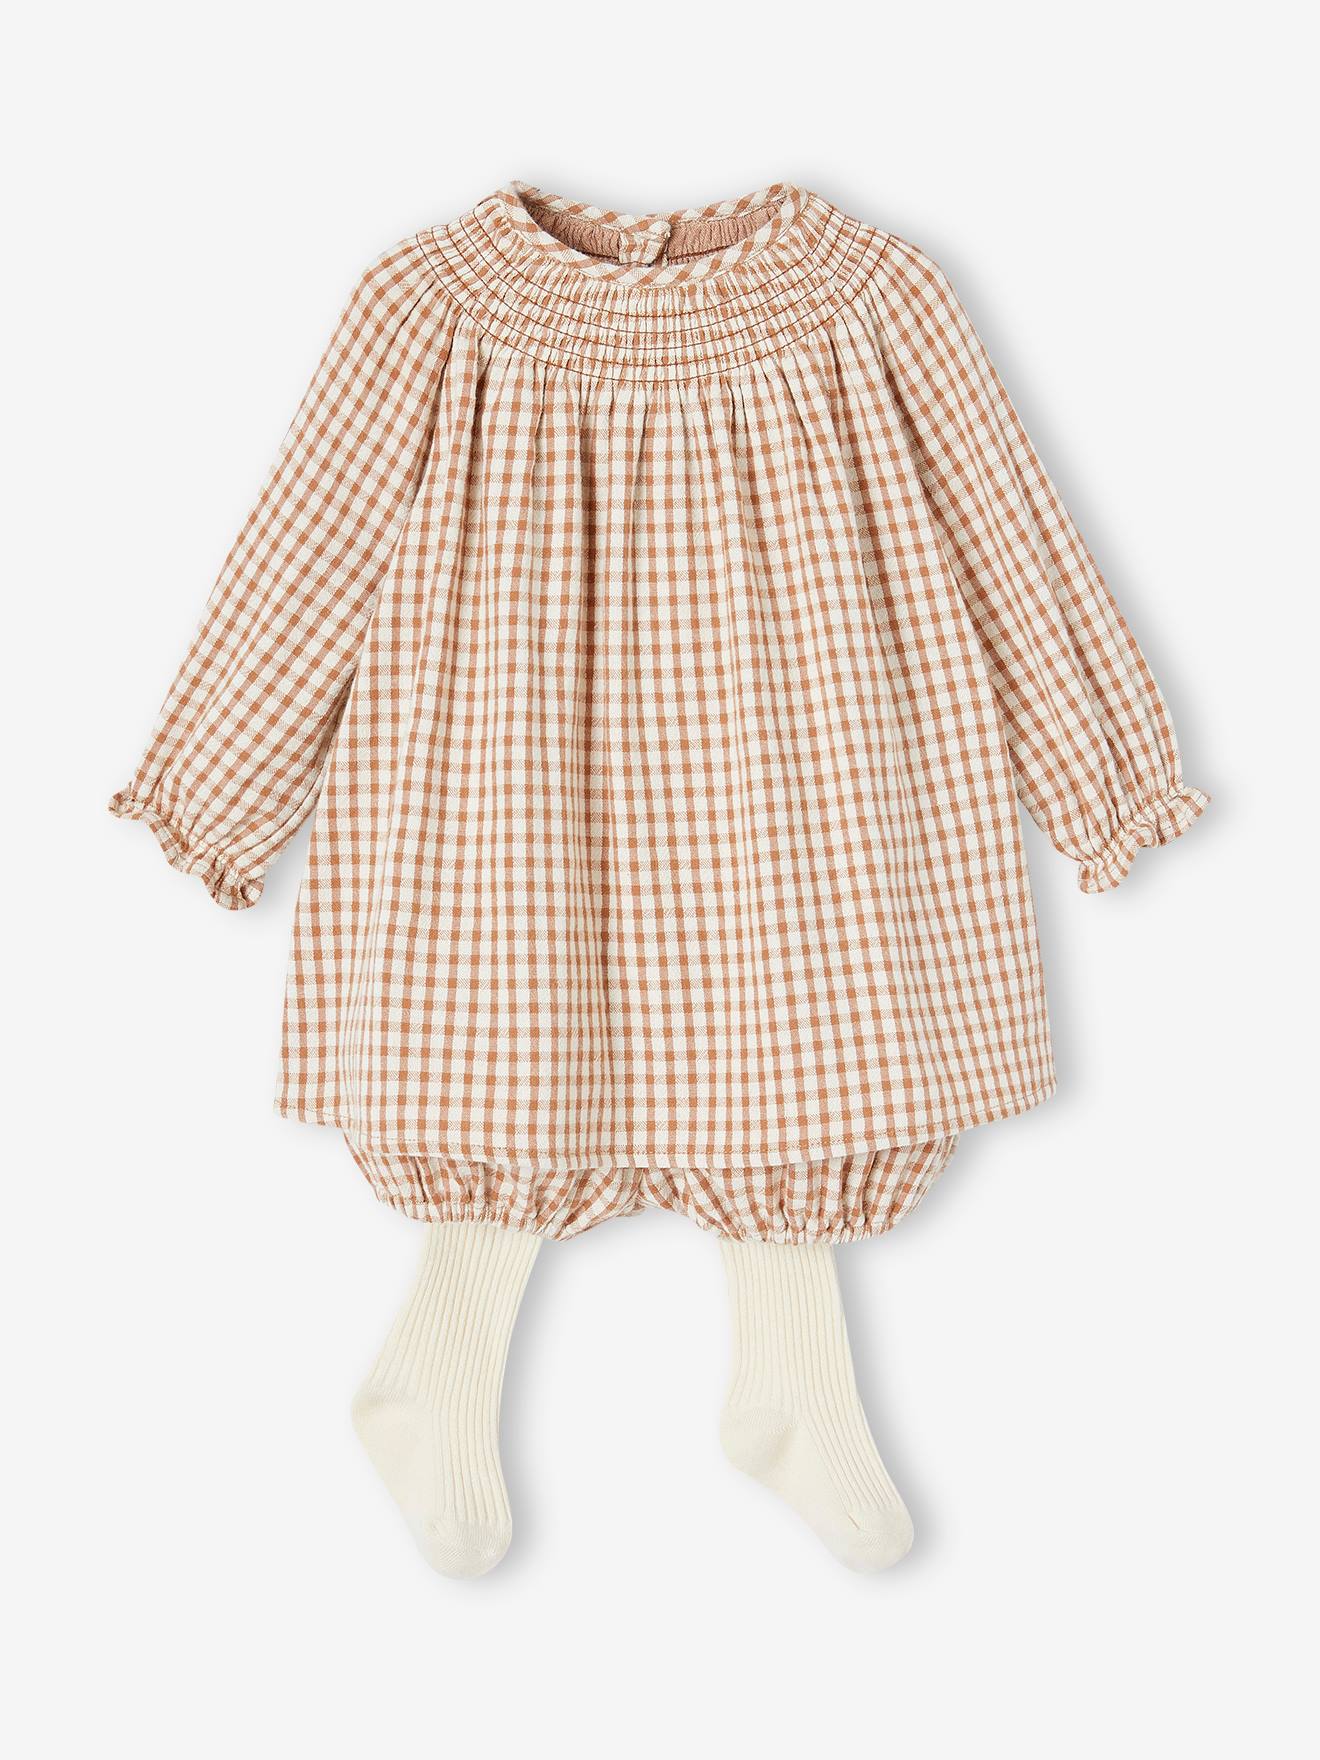 3-Piece Ensemble: Dress, Bloomers & Tights for Babies pecan nut